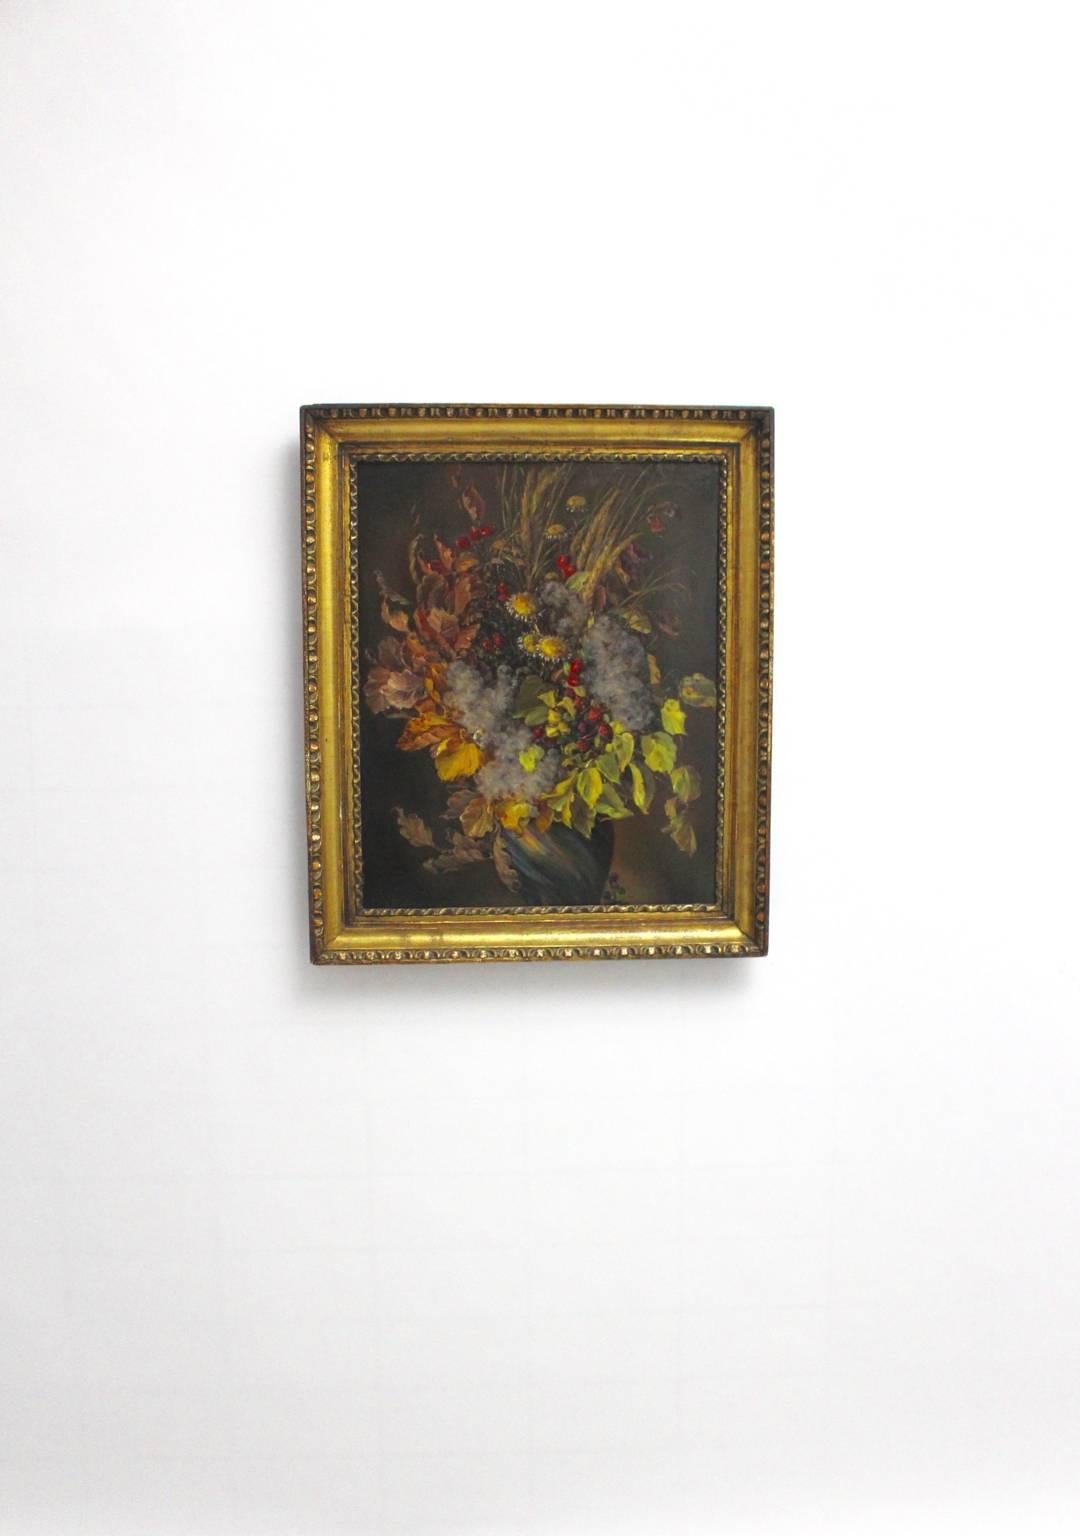 Wood Art Deco Painting Autumn Leaves Bouquet by Emil Fiala, Vienna, 1930s For Sale